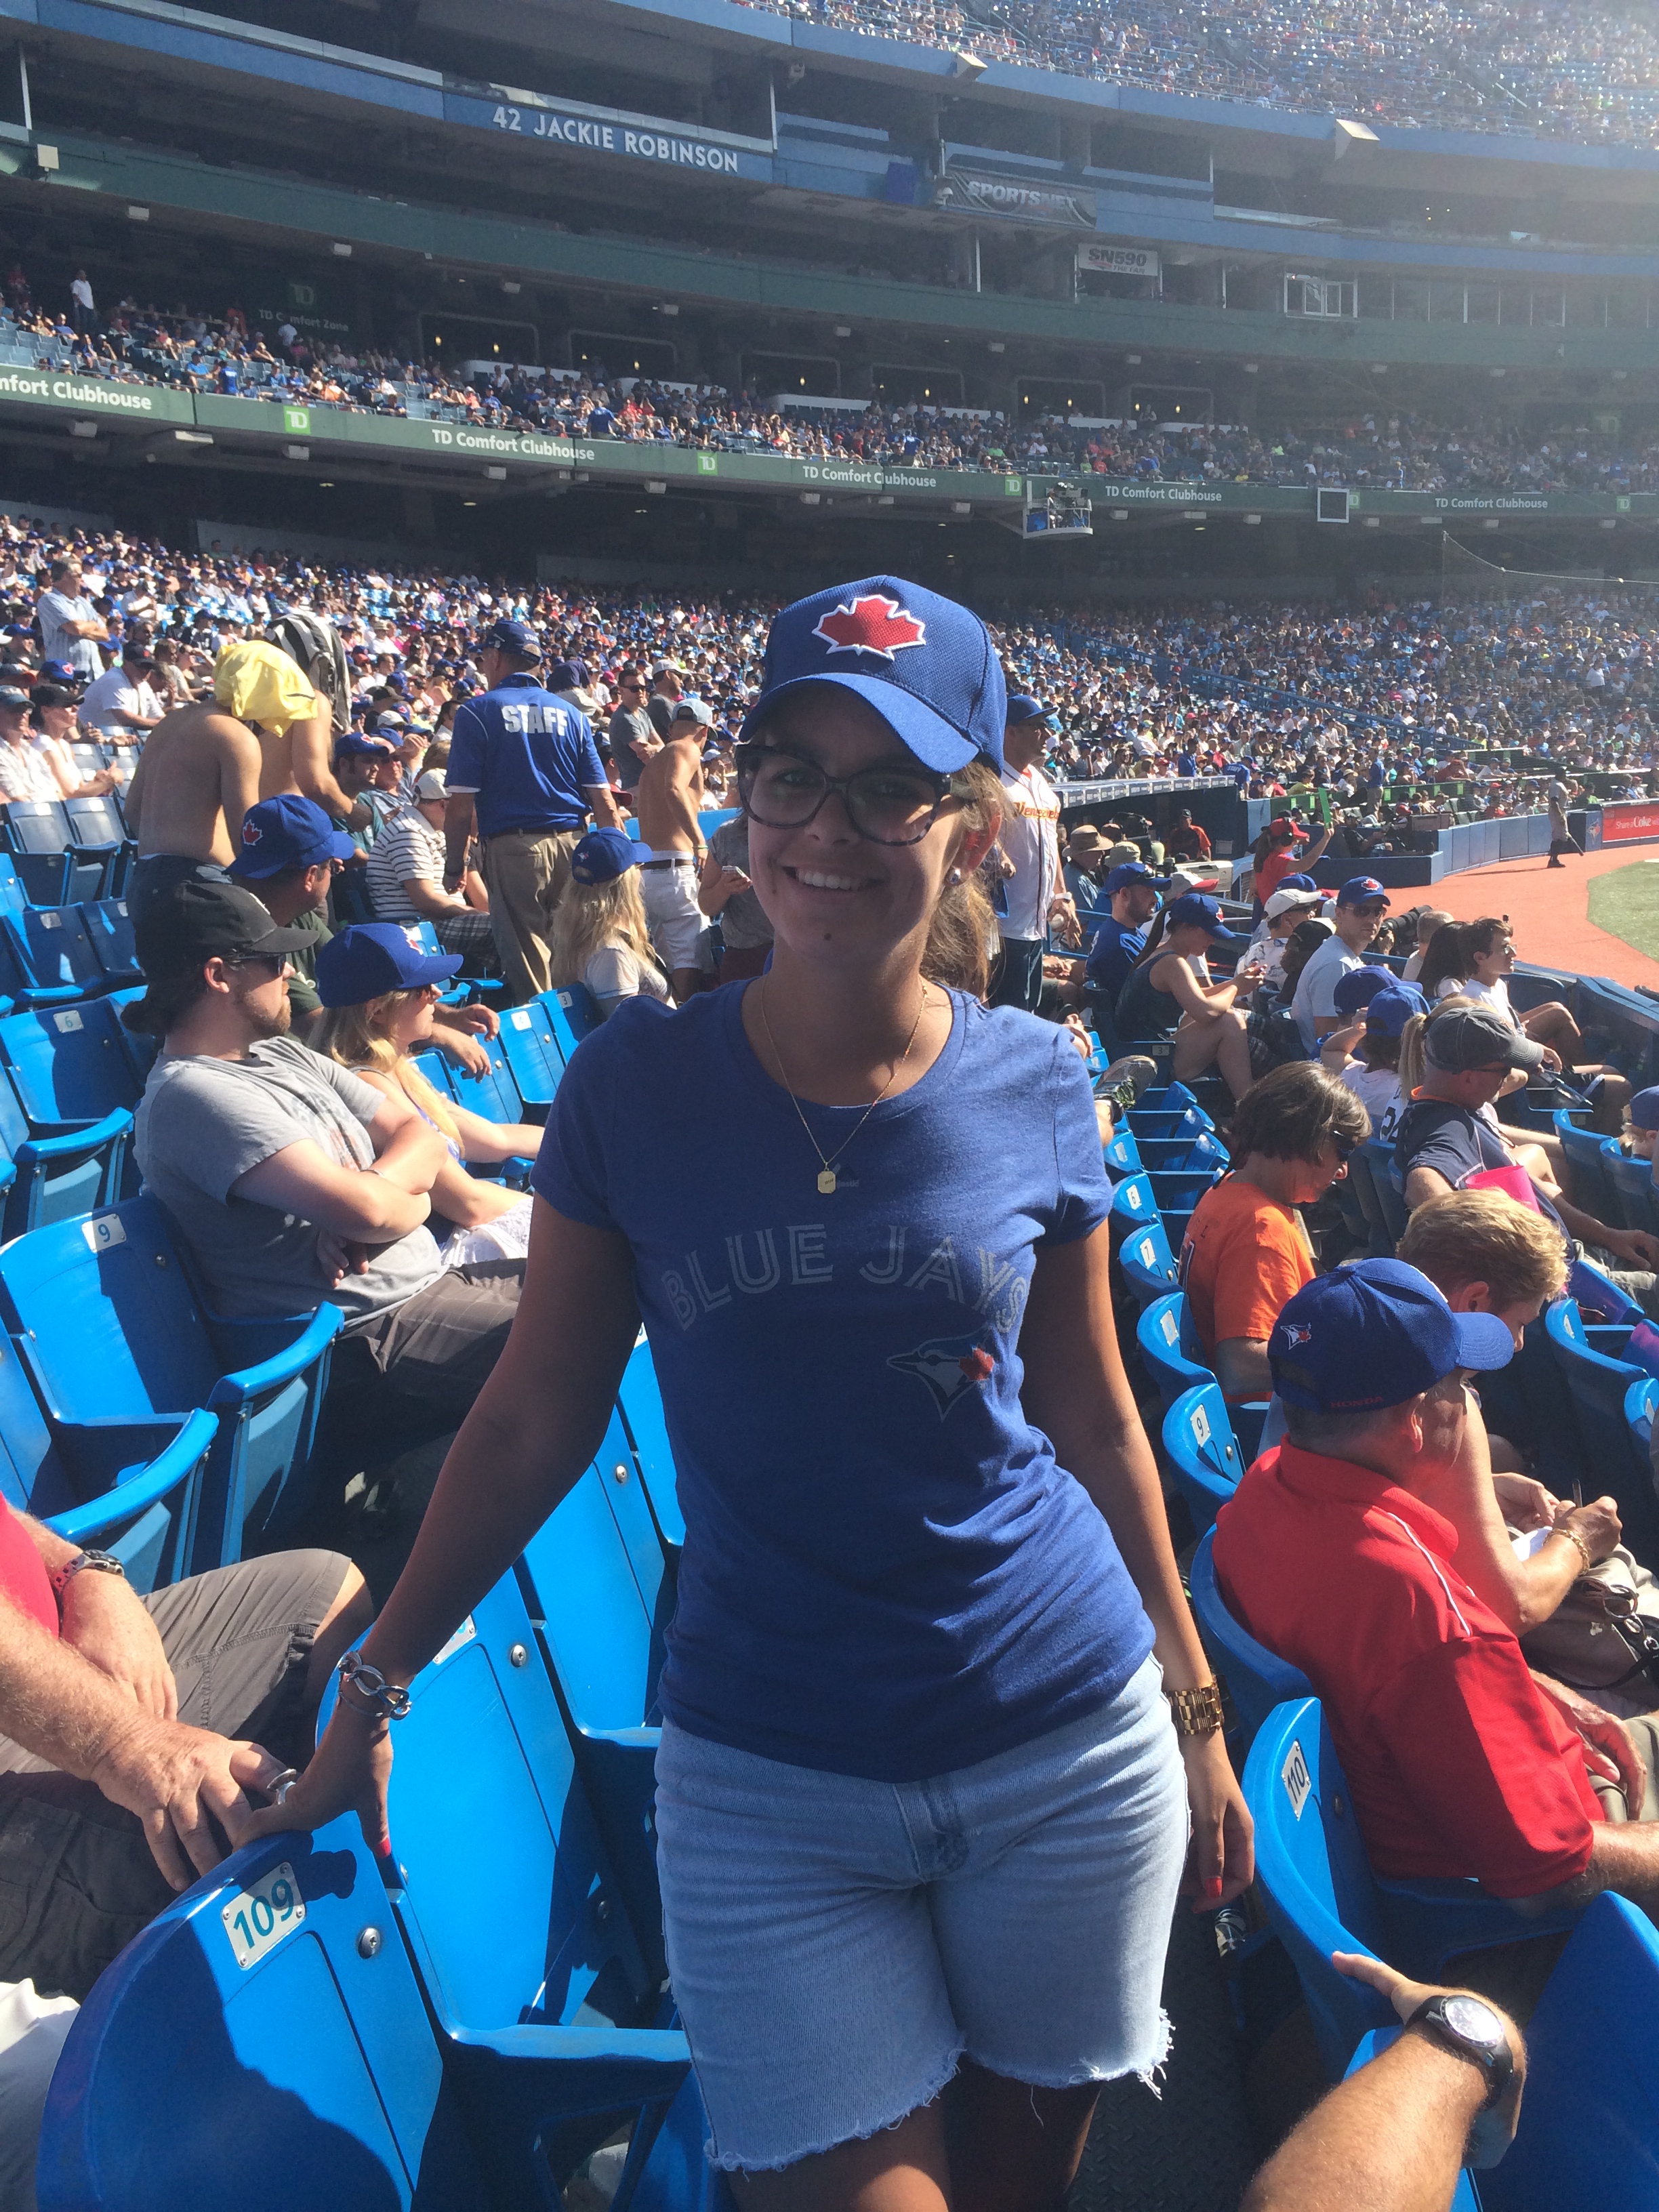 what to wear to a blue jays game